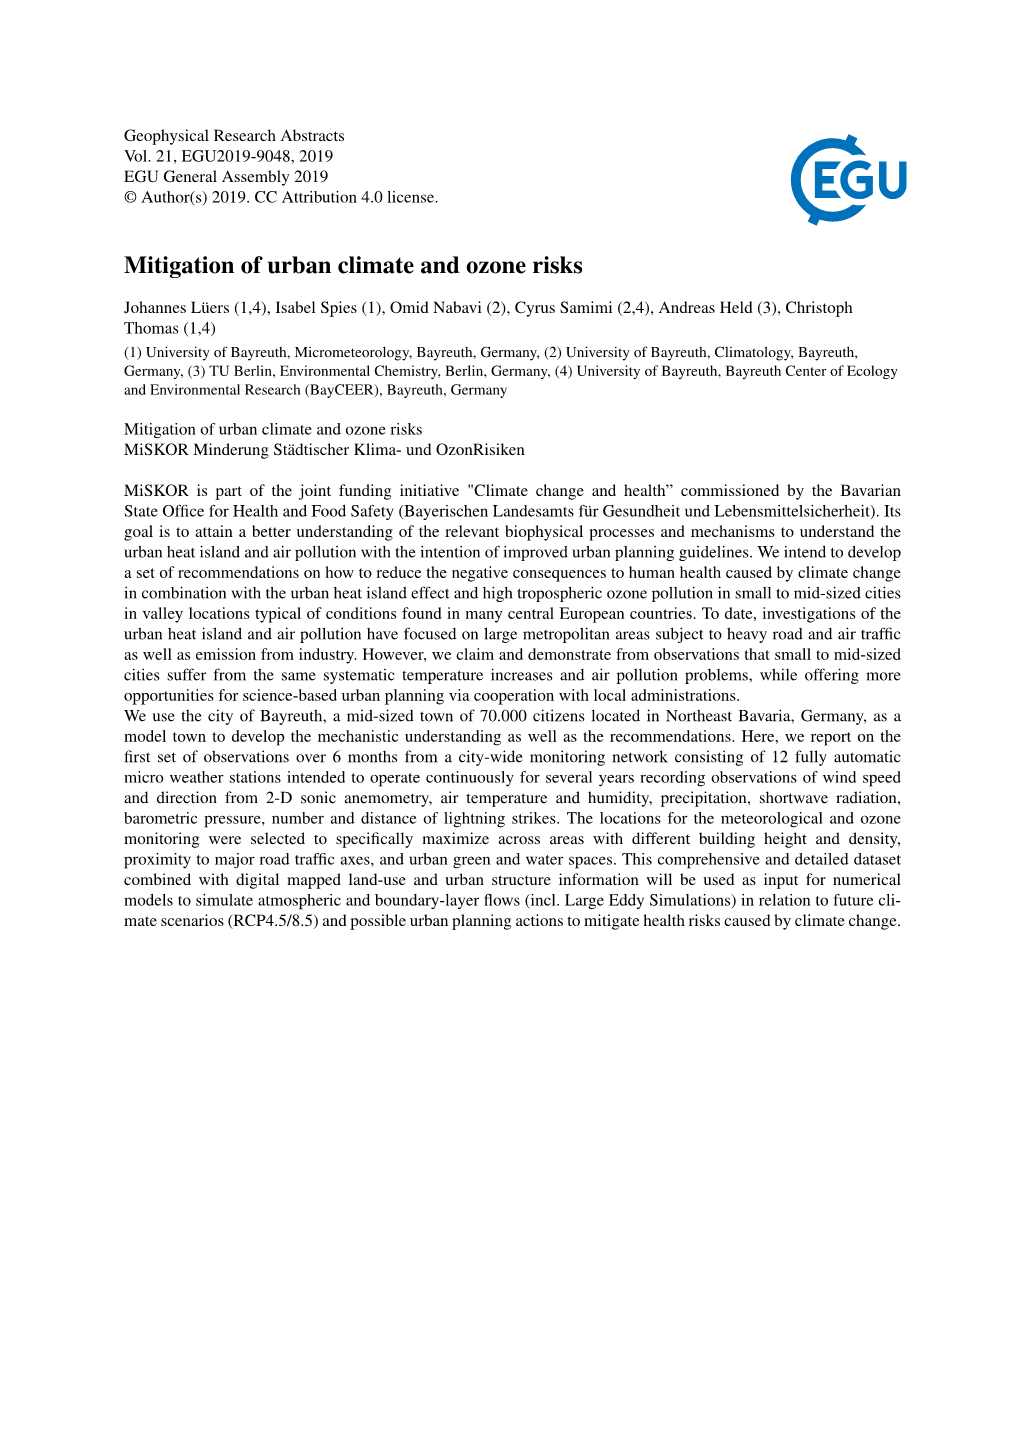 Mitigation of Urban Climate and Ozone Risks